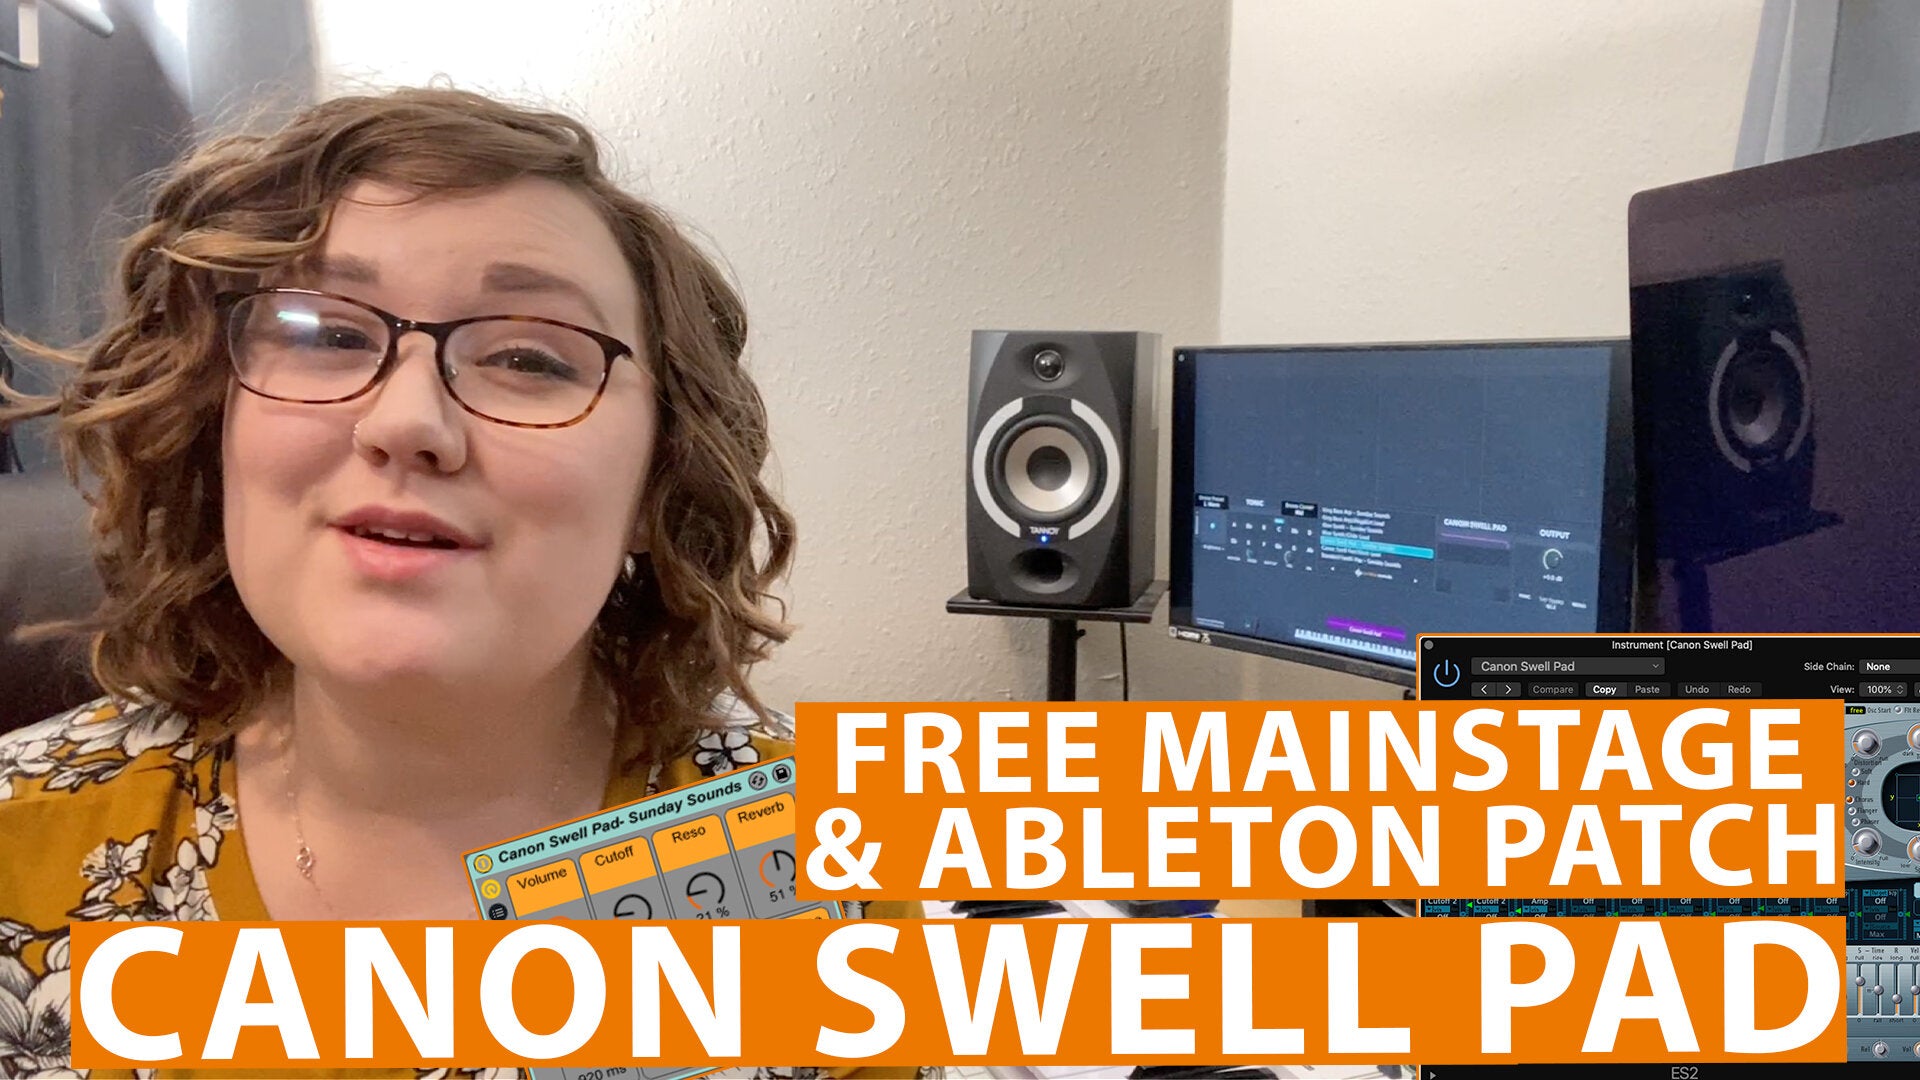 Free MainStage & Ableton Worship Patch! - Canon Swell Pad